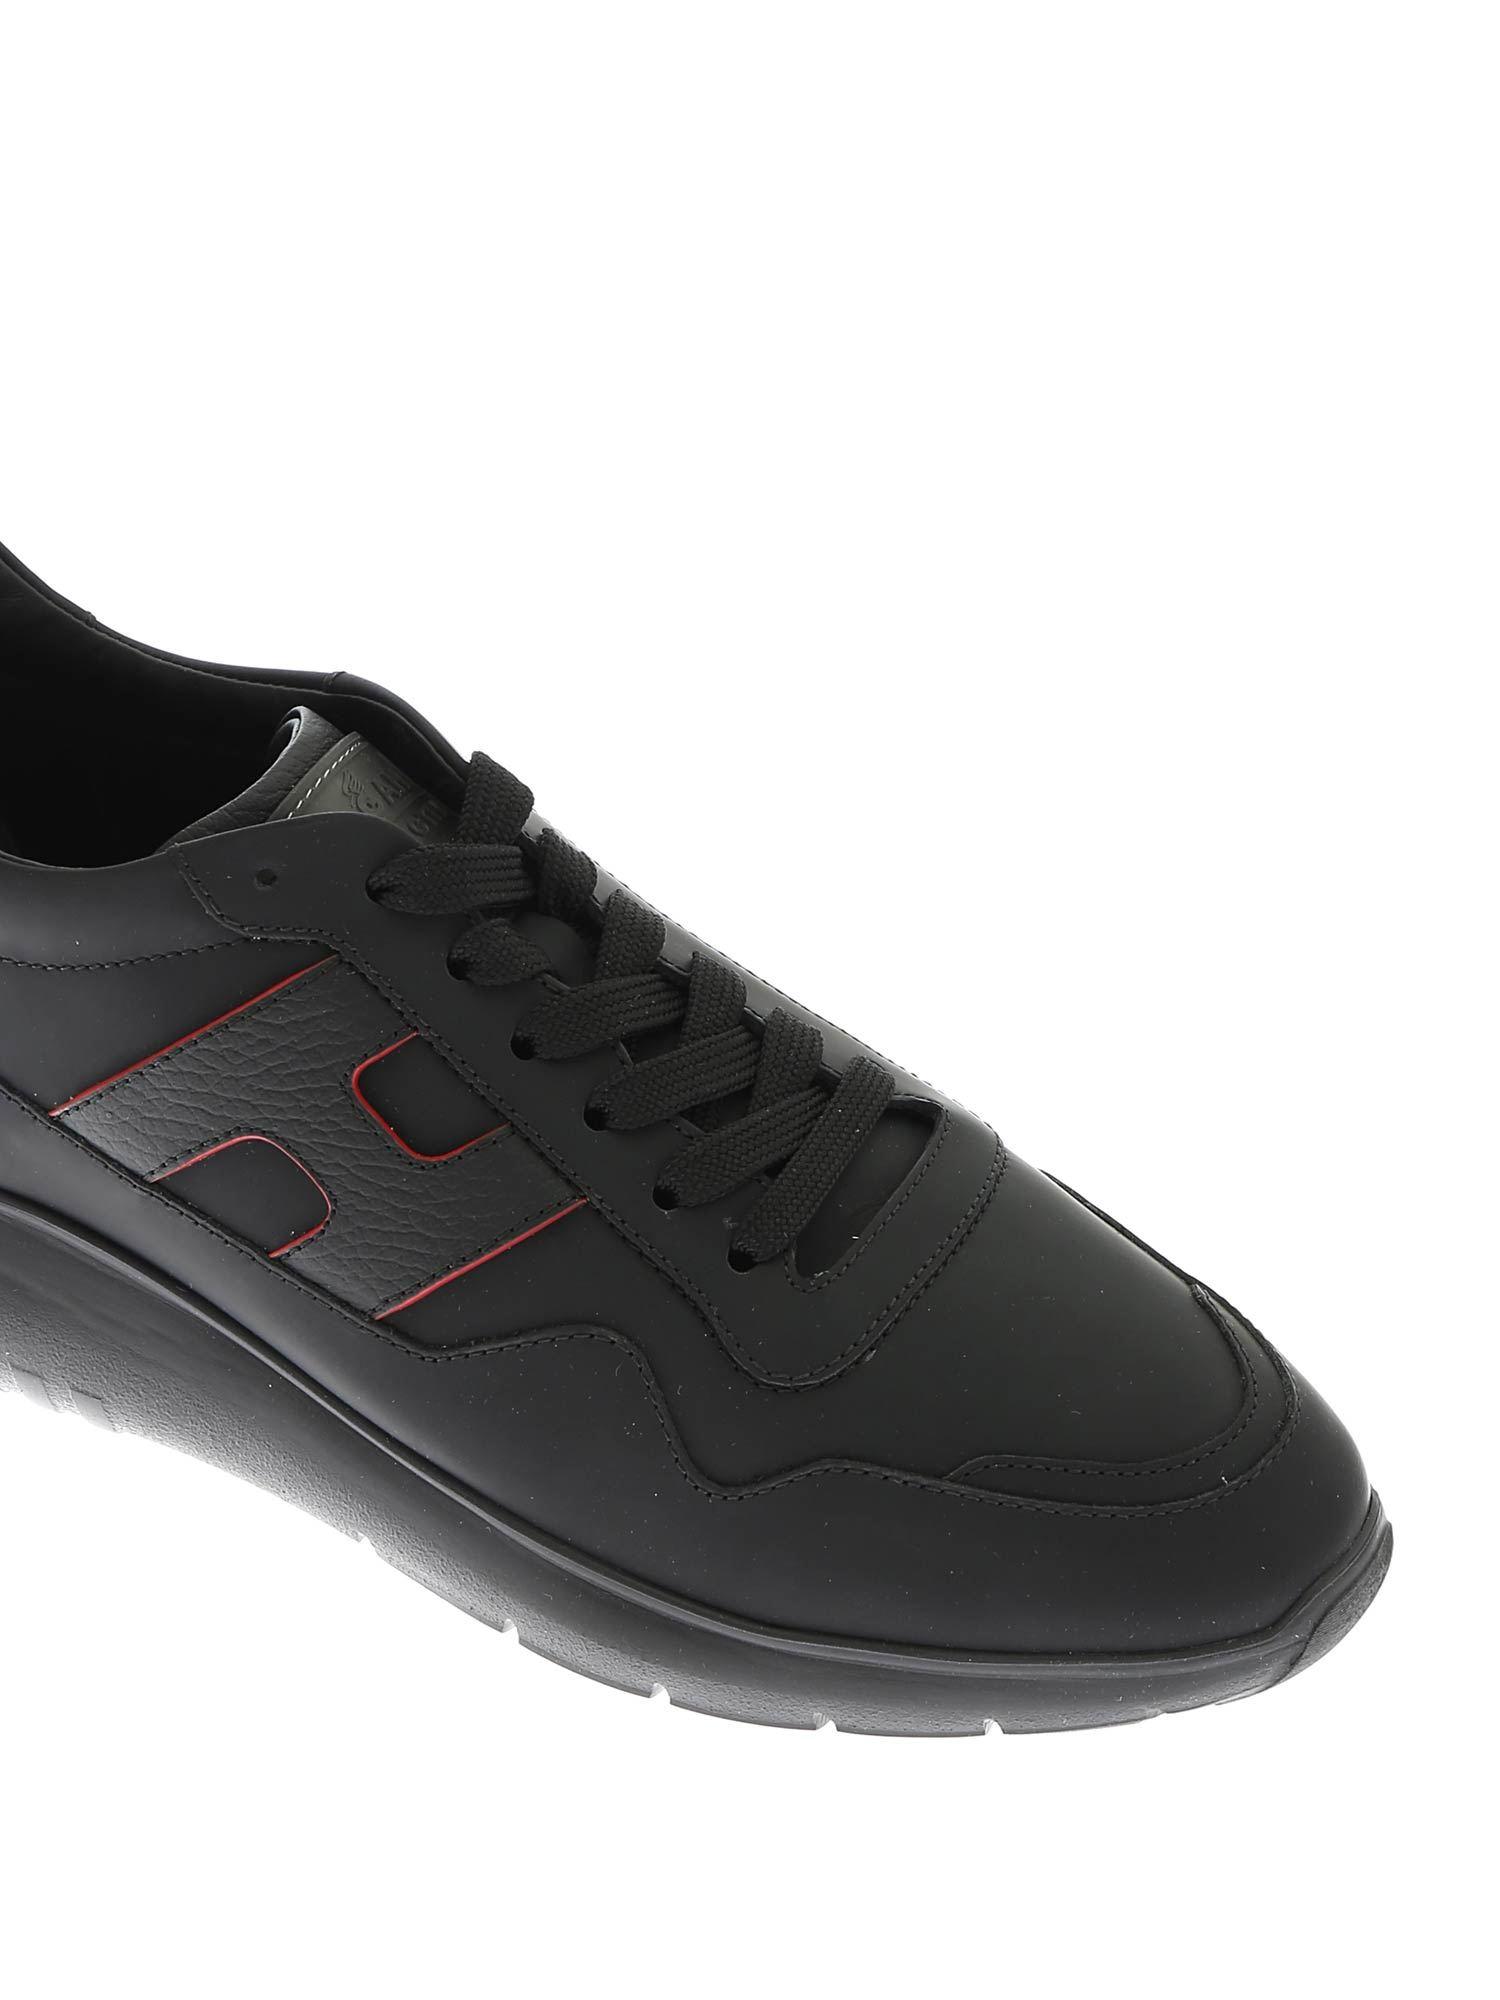 Hogan Leather Interactive 3 Sneakers In Black for Men - Lyst